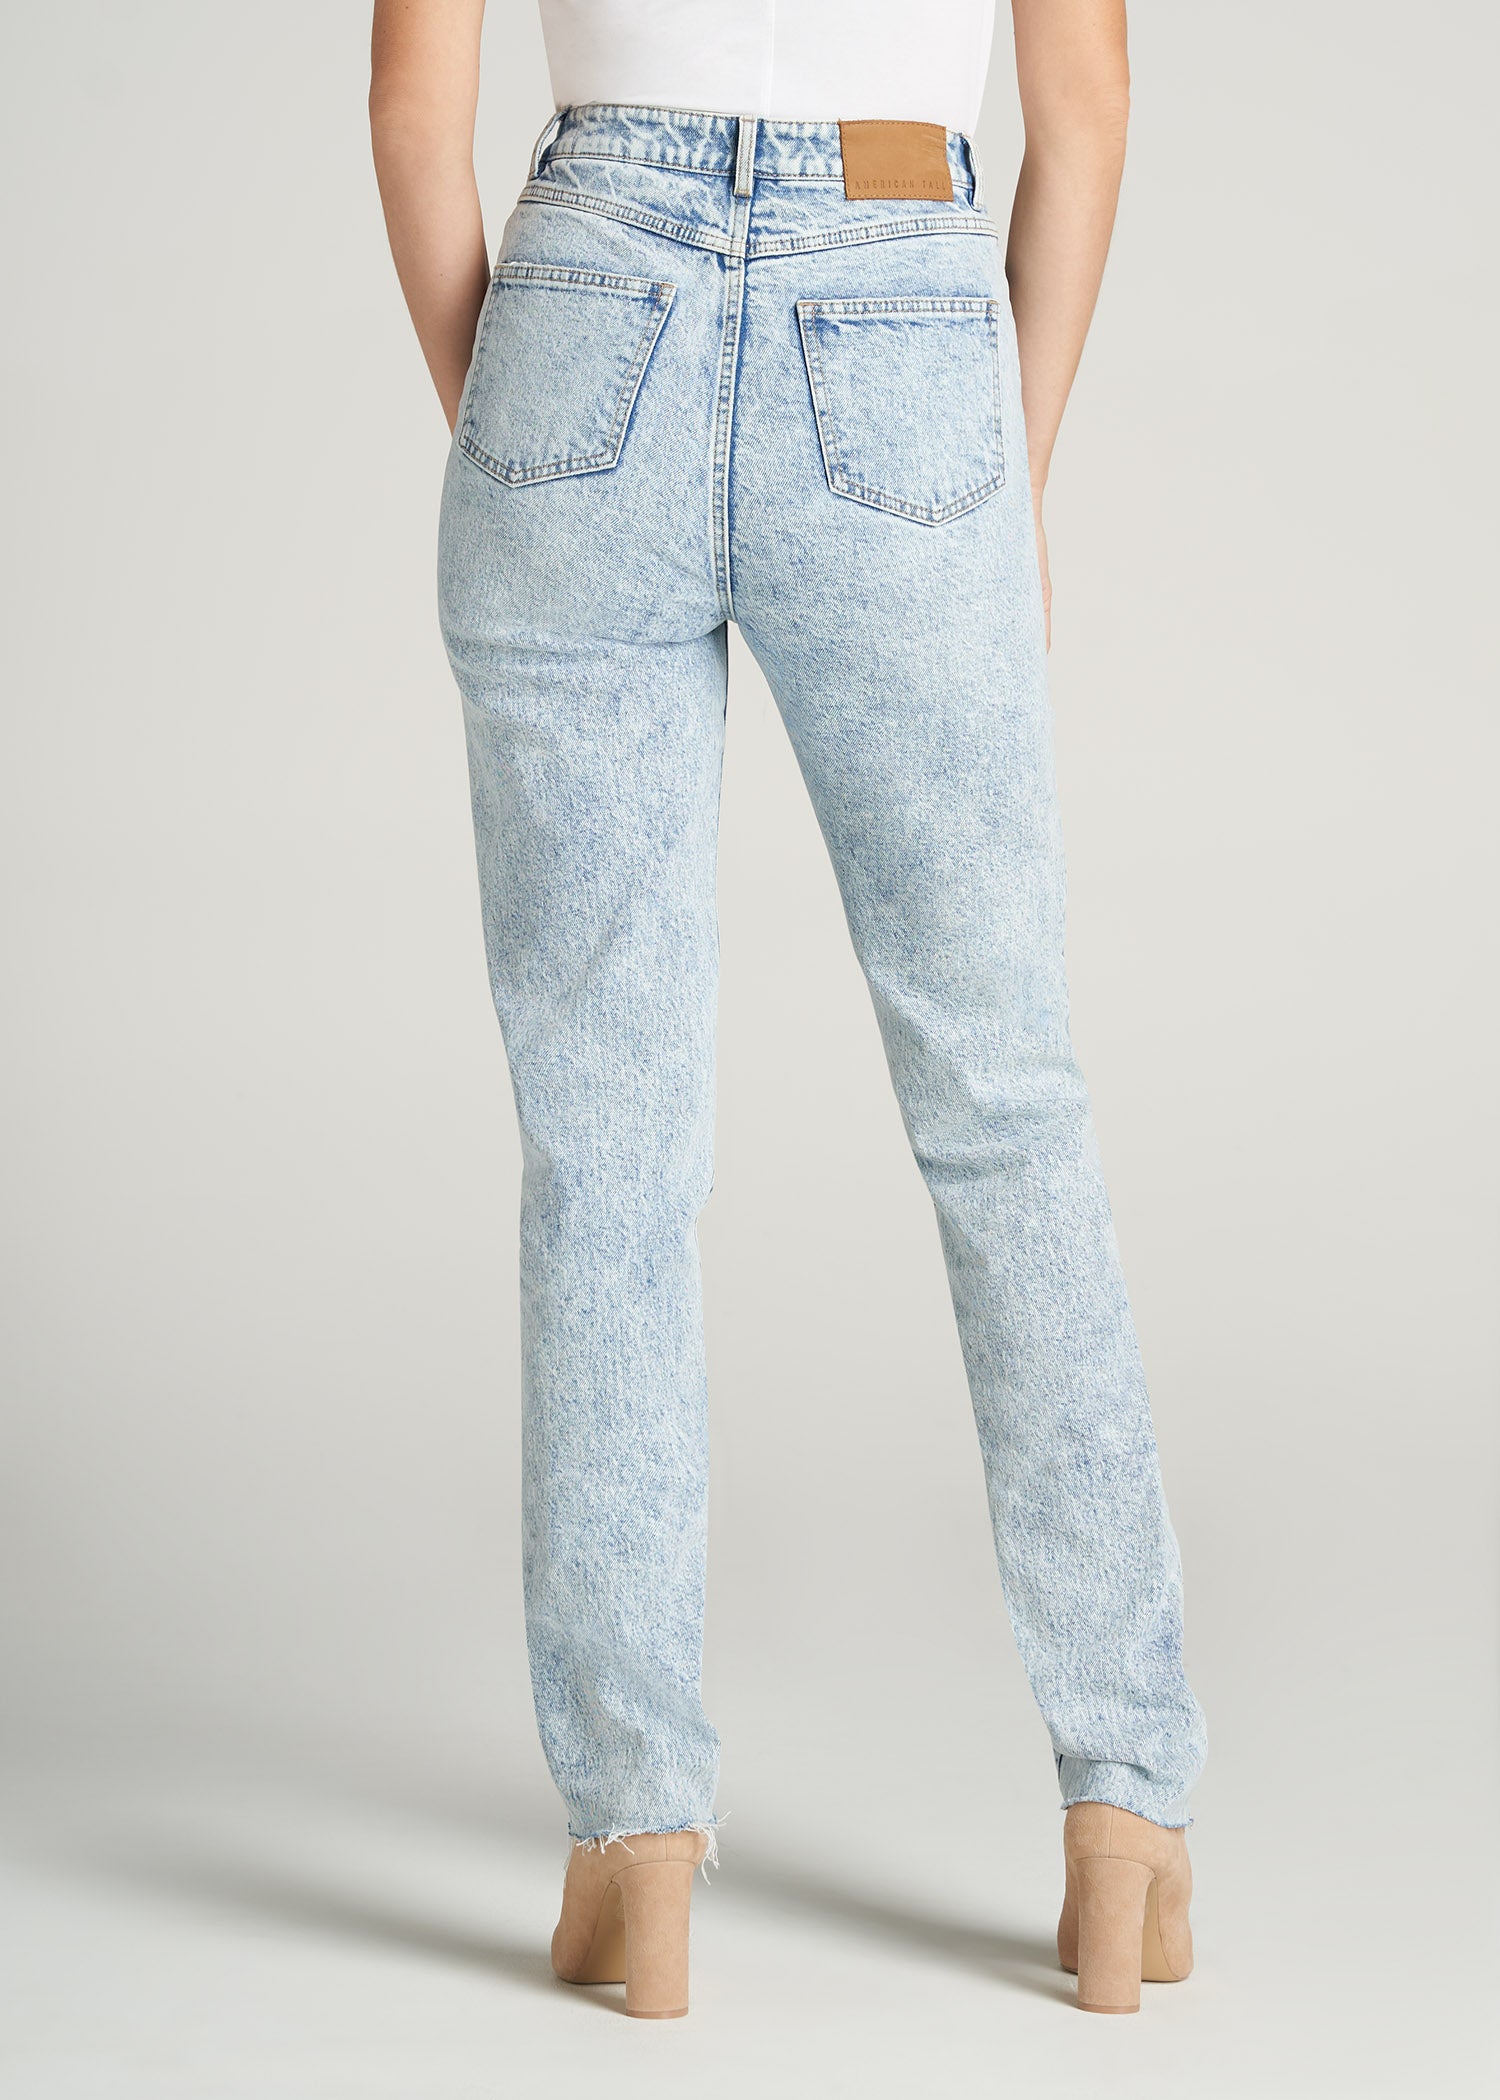 spændende søm Ekspedient Stone Washed Jeans for Tall Women | Lola Stretch Slim-Fit – American Tall